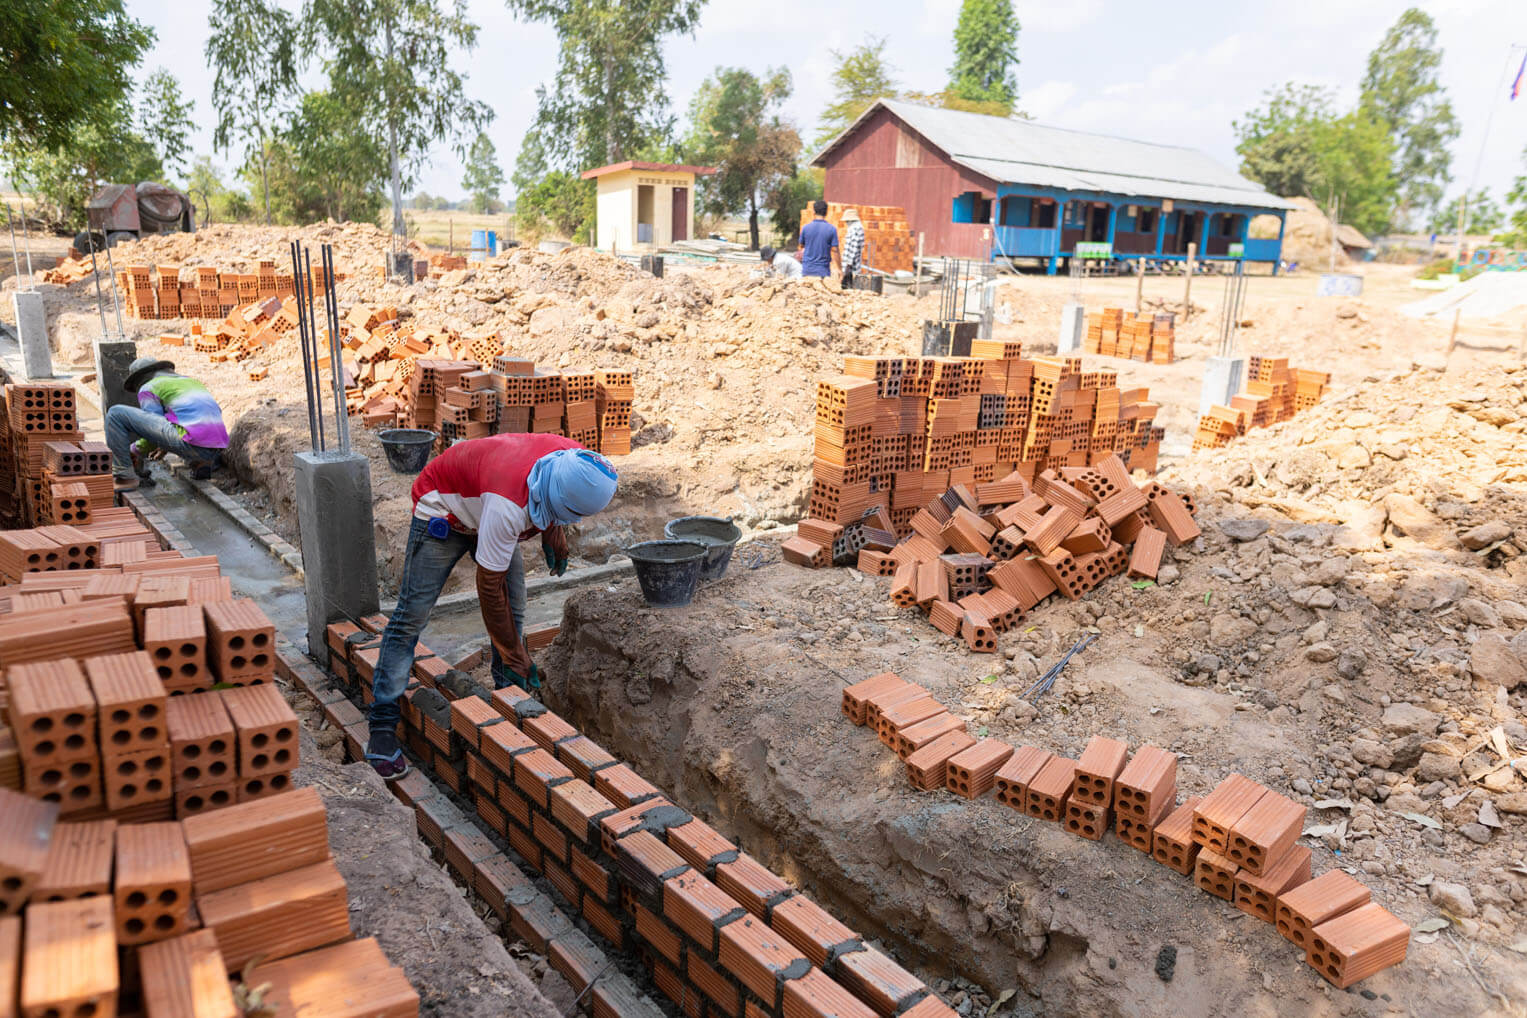 A new and improved elementary school is being built for the children in a rural village in Cambodia. 